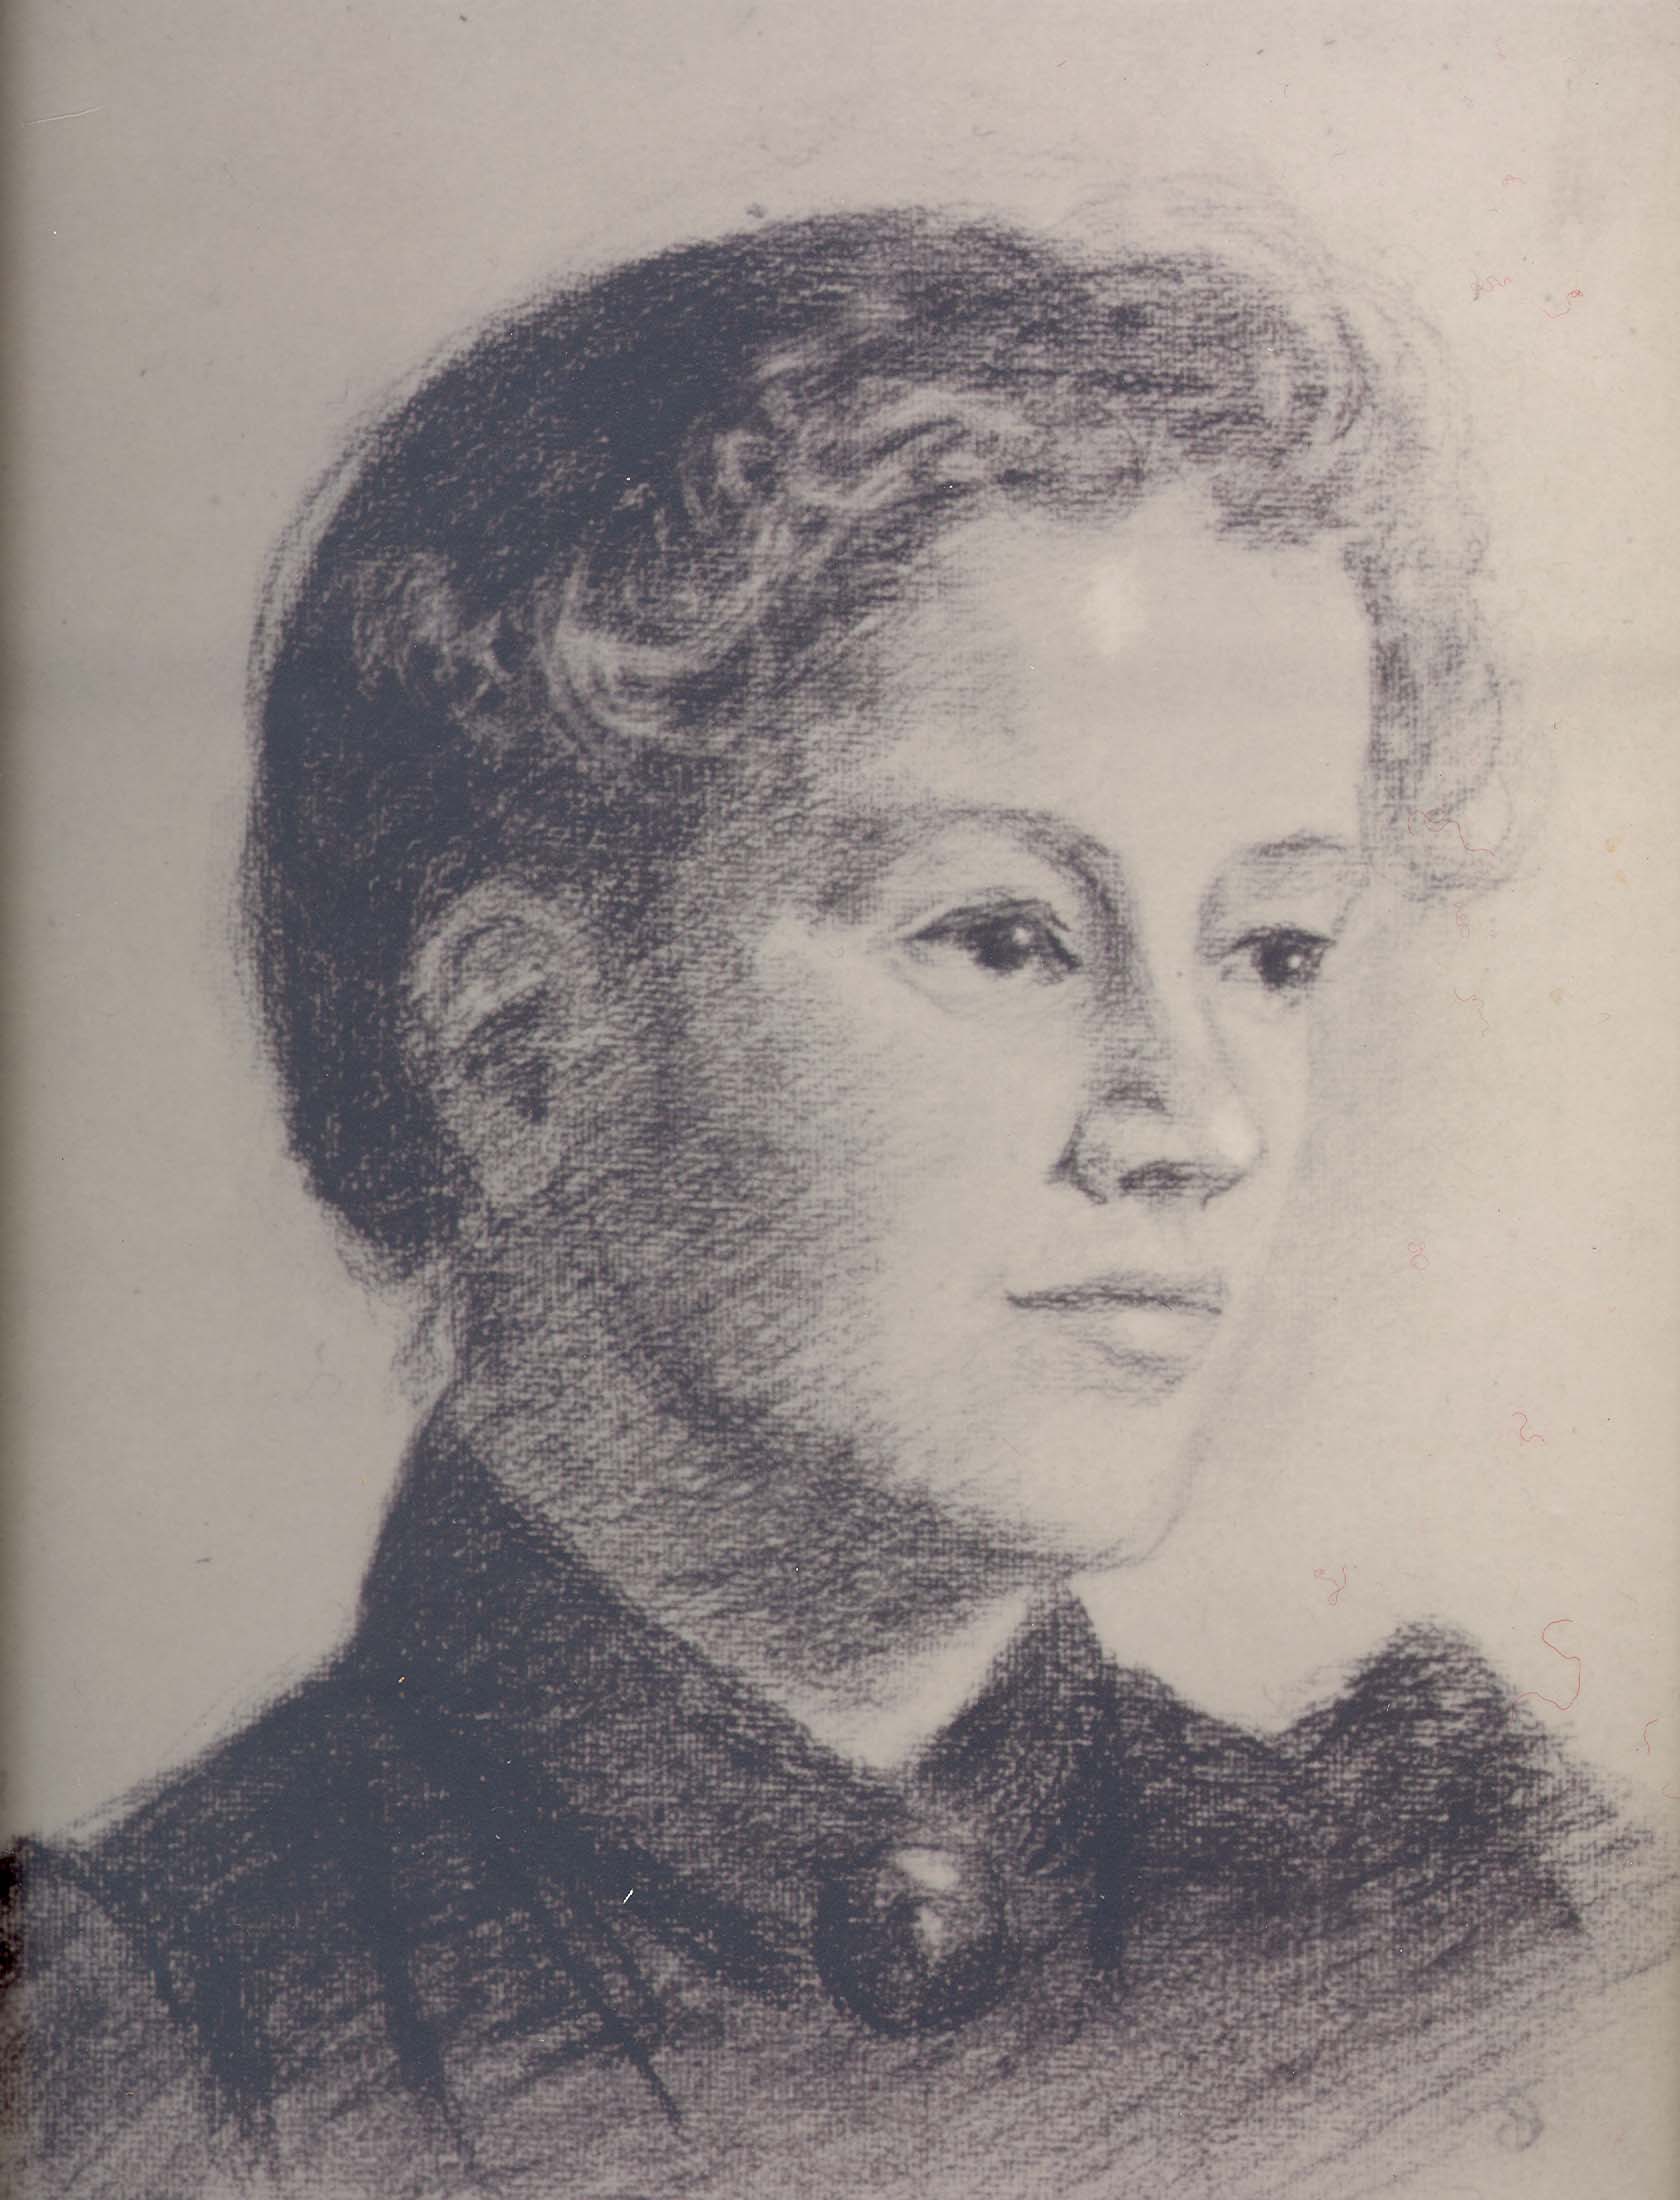 Portrait of Rosamond Emily Stephen in her twenty-fourth year by her sister, DJ [Dorothea] Stephen, 1892. RCB Library Collection.